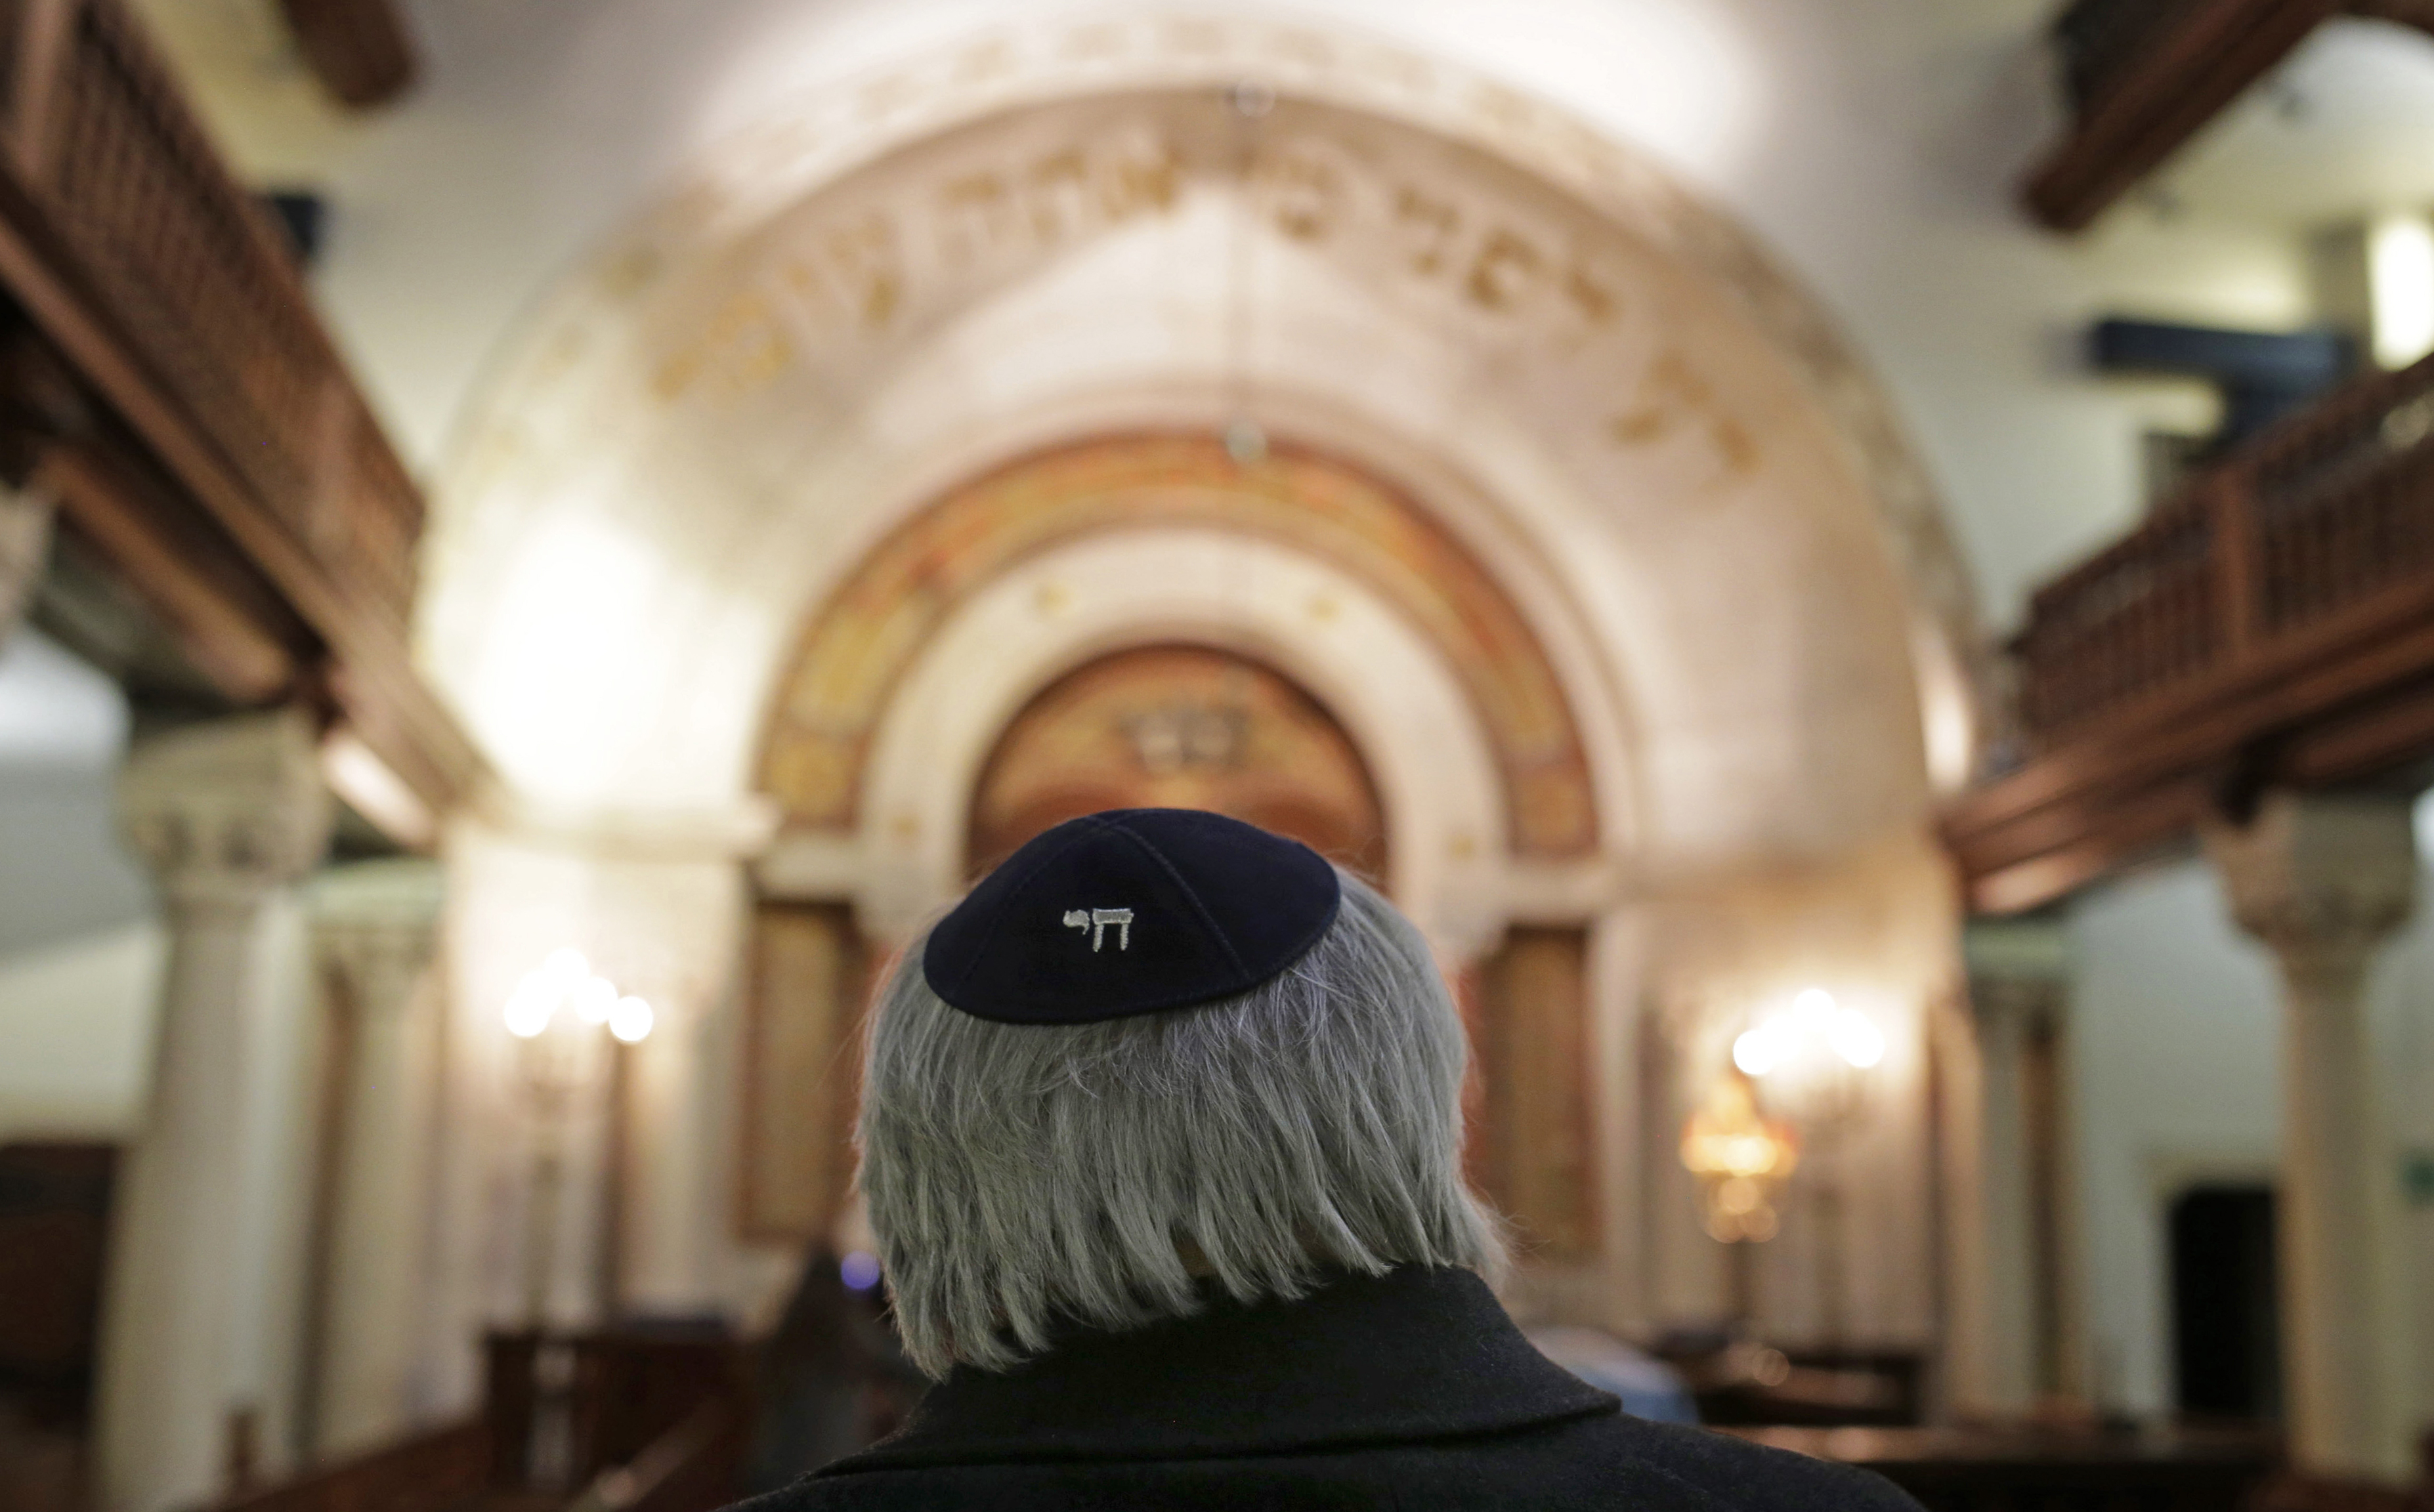 In this photo taken on Wednesday, Jan. 28, 2015, Jose Oulman Bensaude Carp, President of the Jewish community in Lisbon, waits to be interviewed by The Associated Press at the main Jewish synagogue in Lisbon. (Francisco Seco—AP)